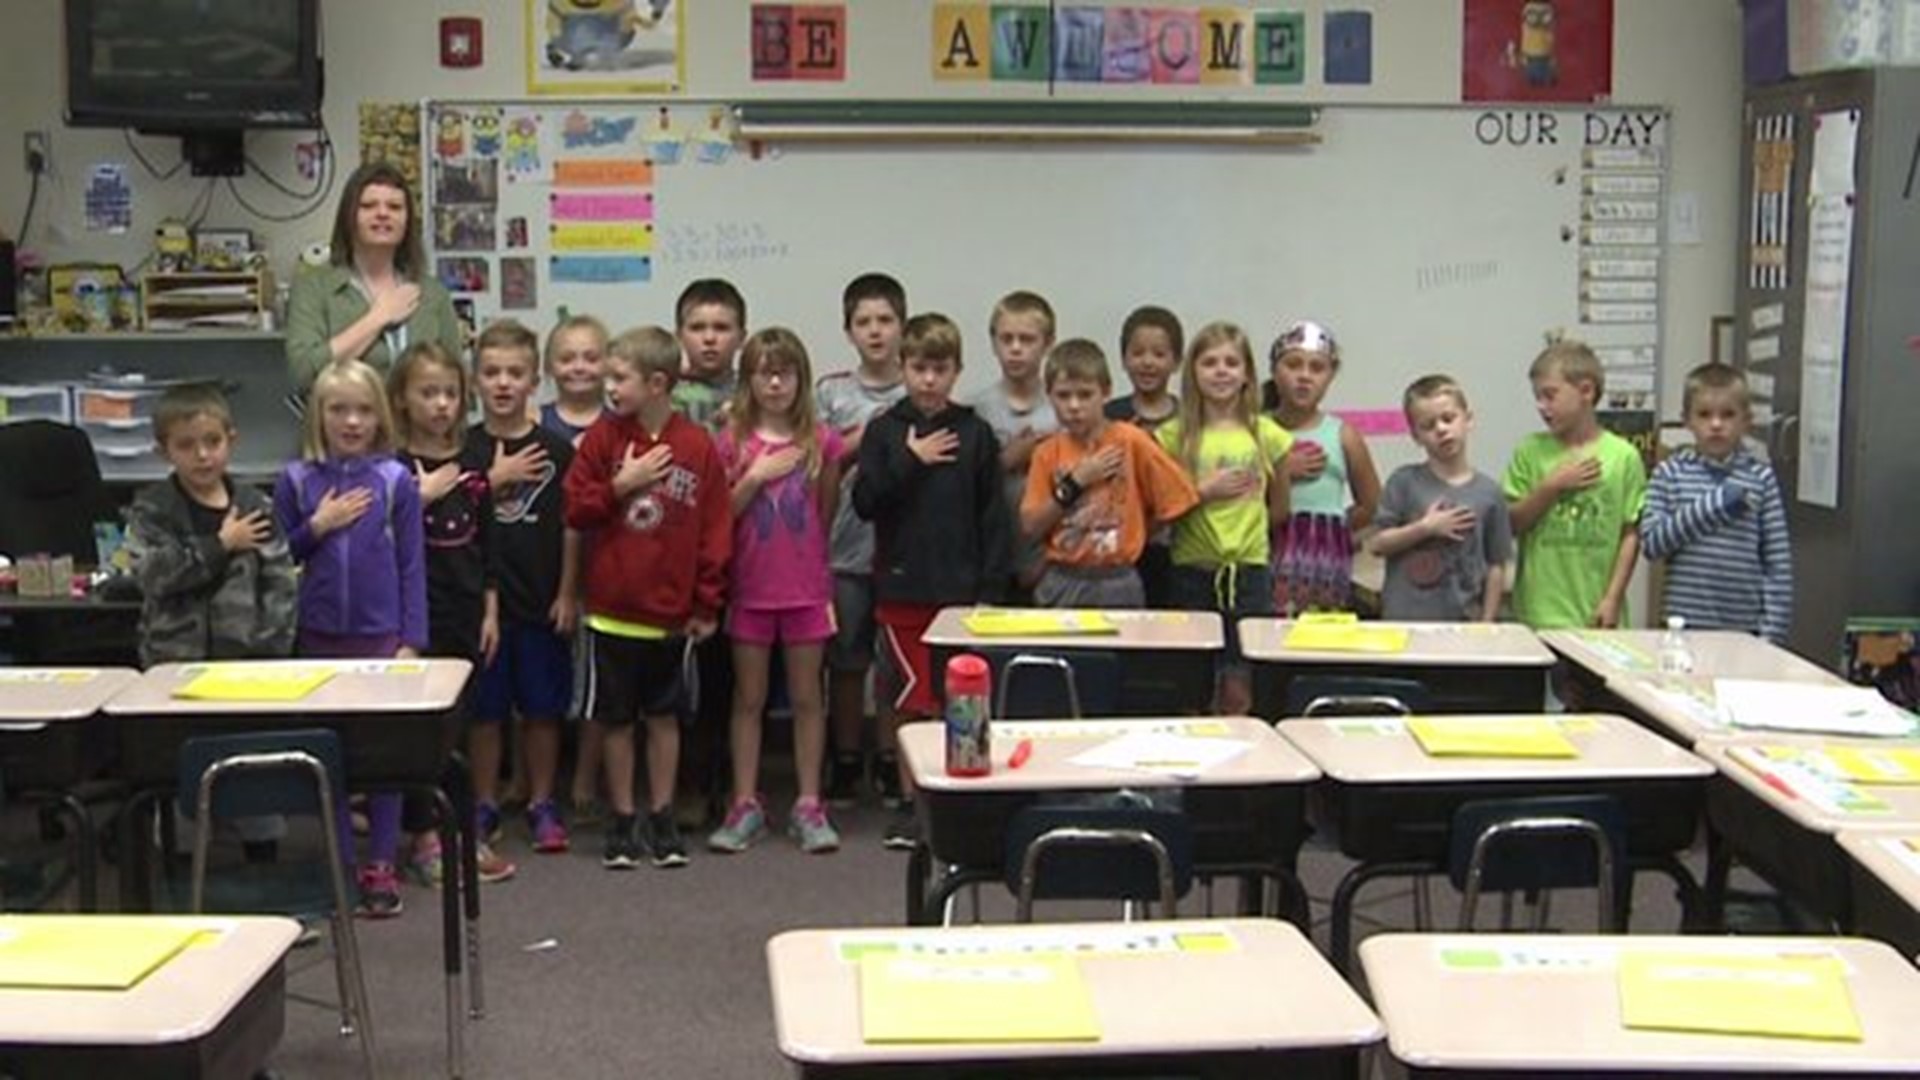 The Pledge from Mrs. Hoover`s class